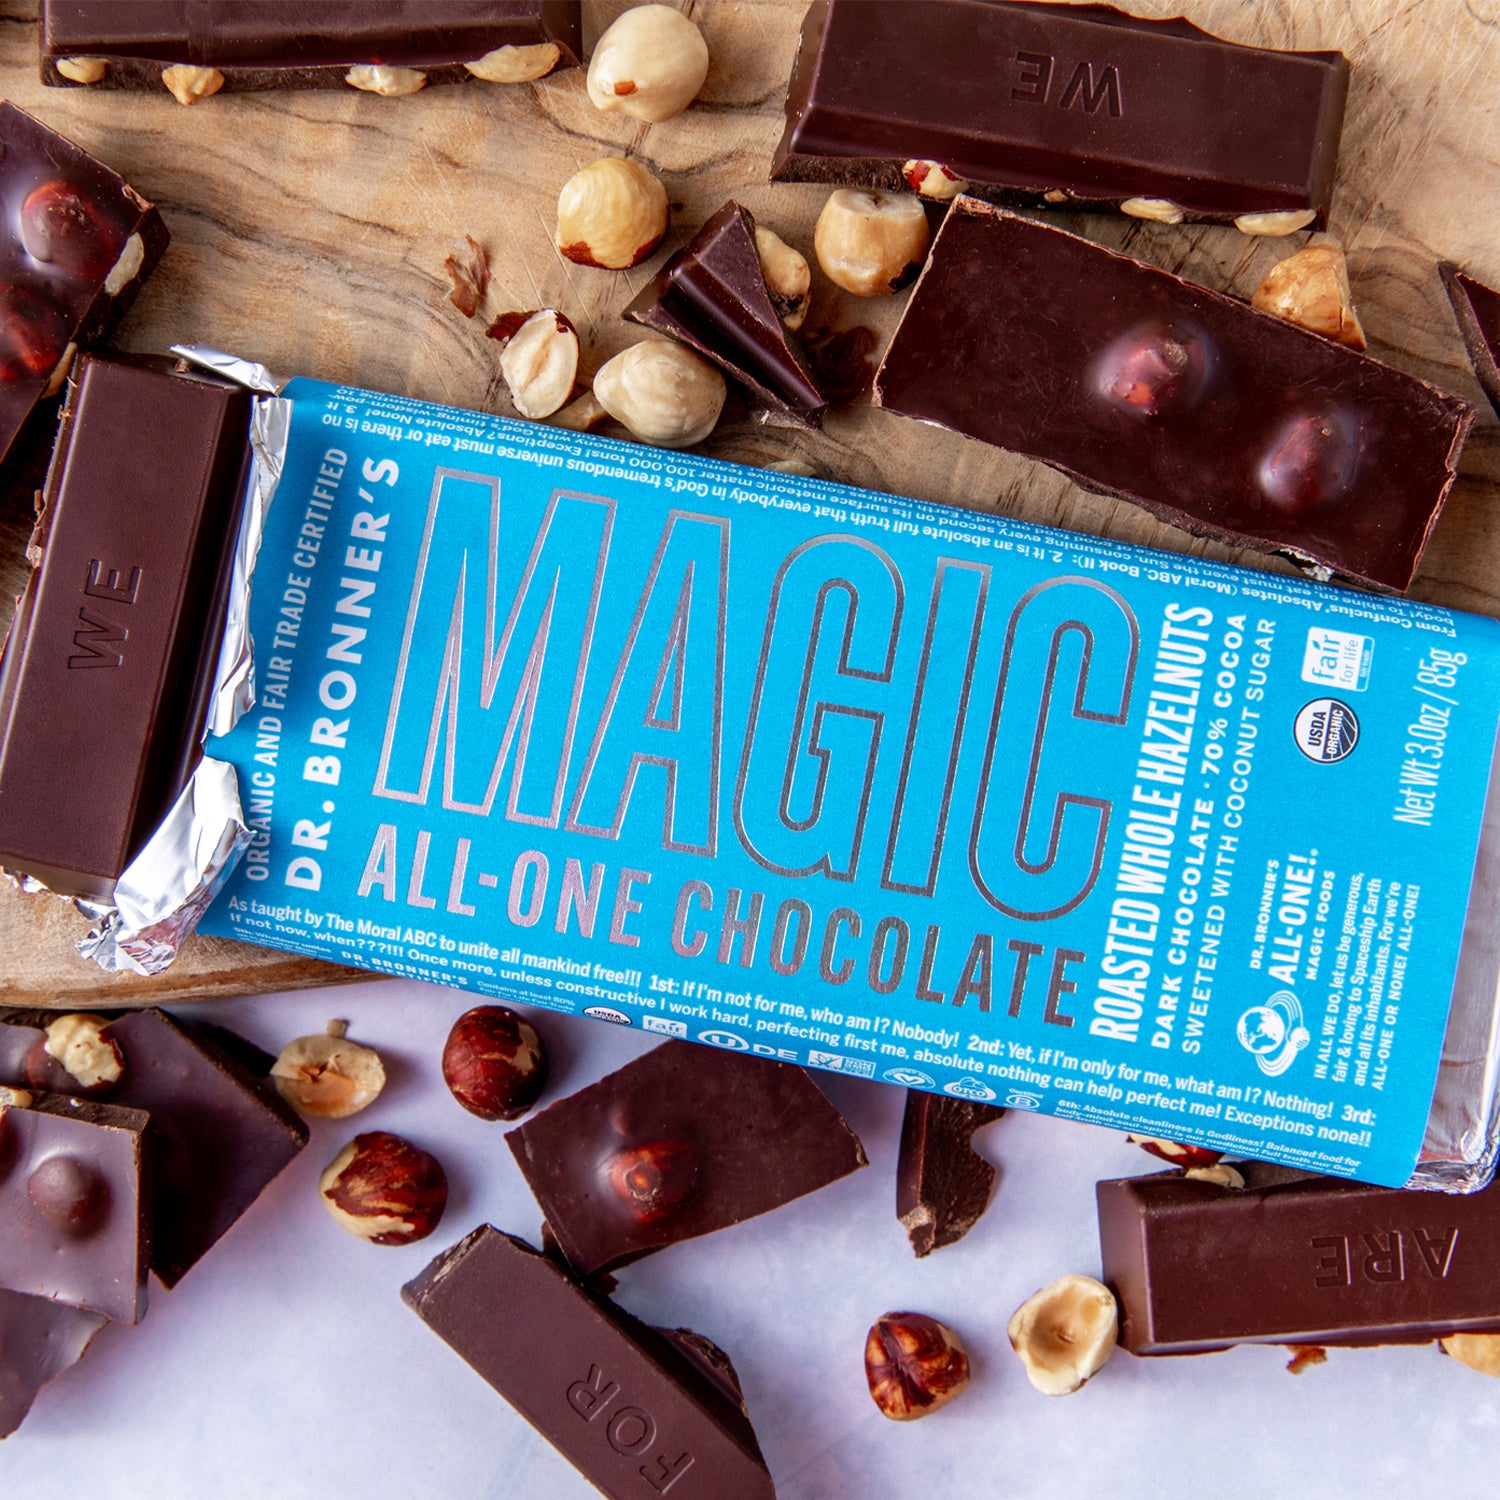 Dr. Bronner's Magic All-One Chocolate - Roasted Whole Hazelnuts